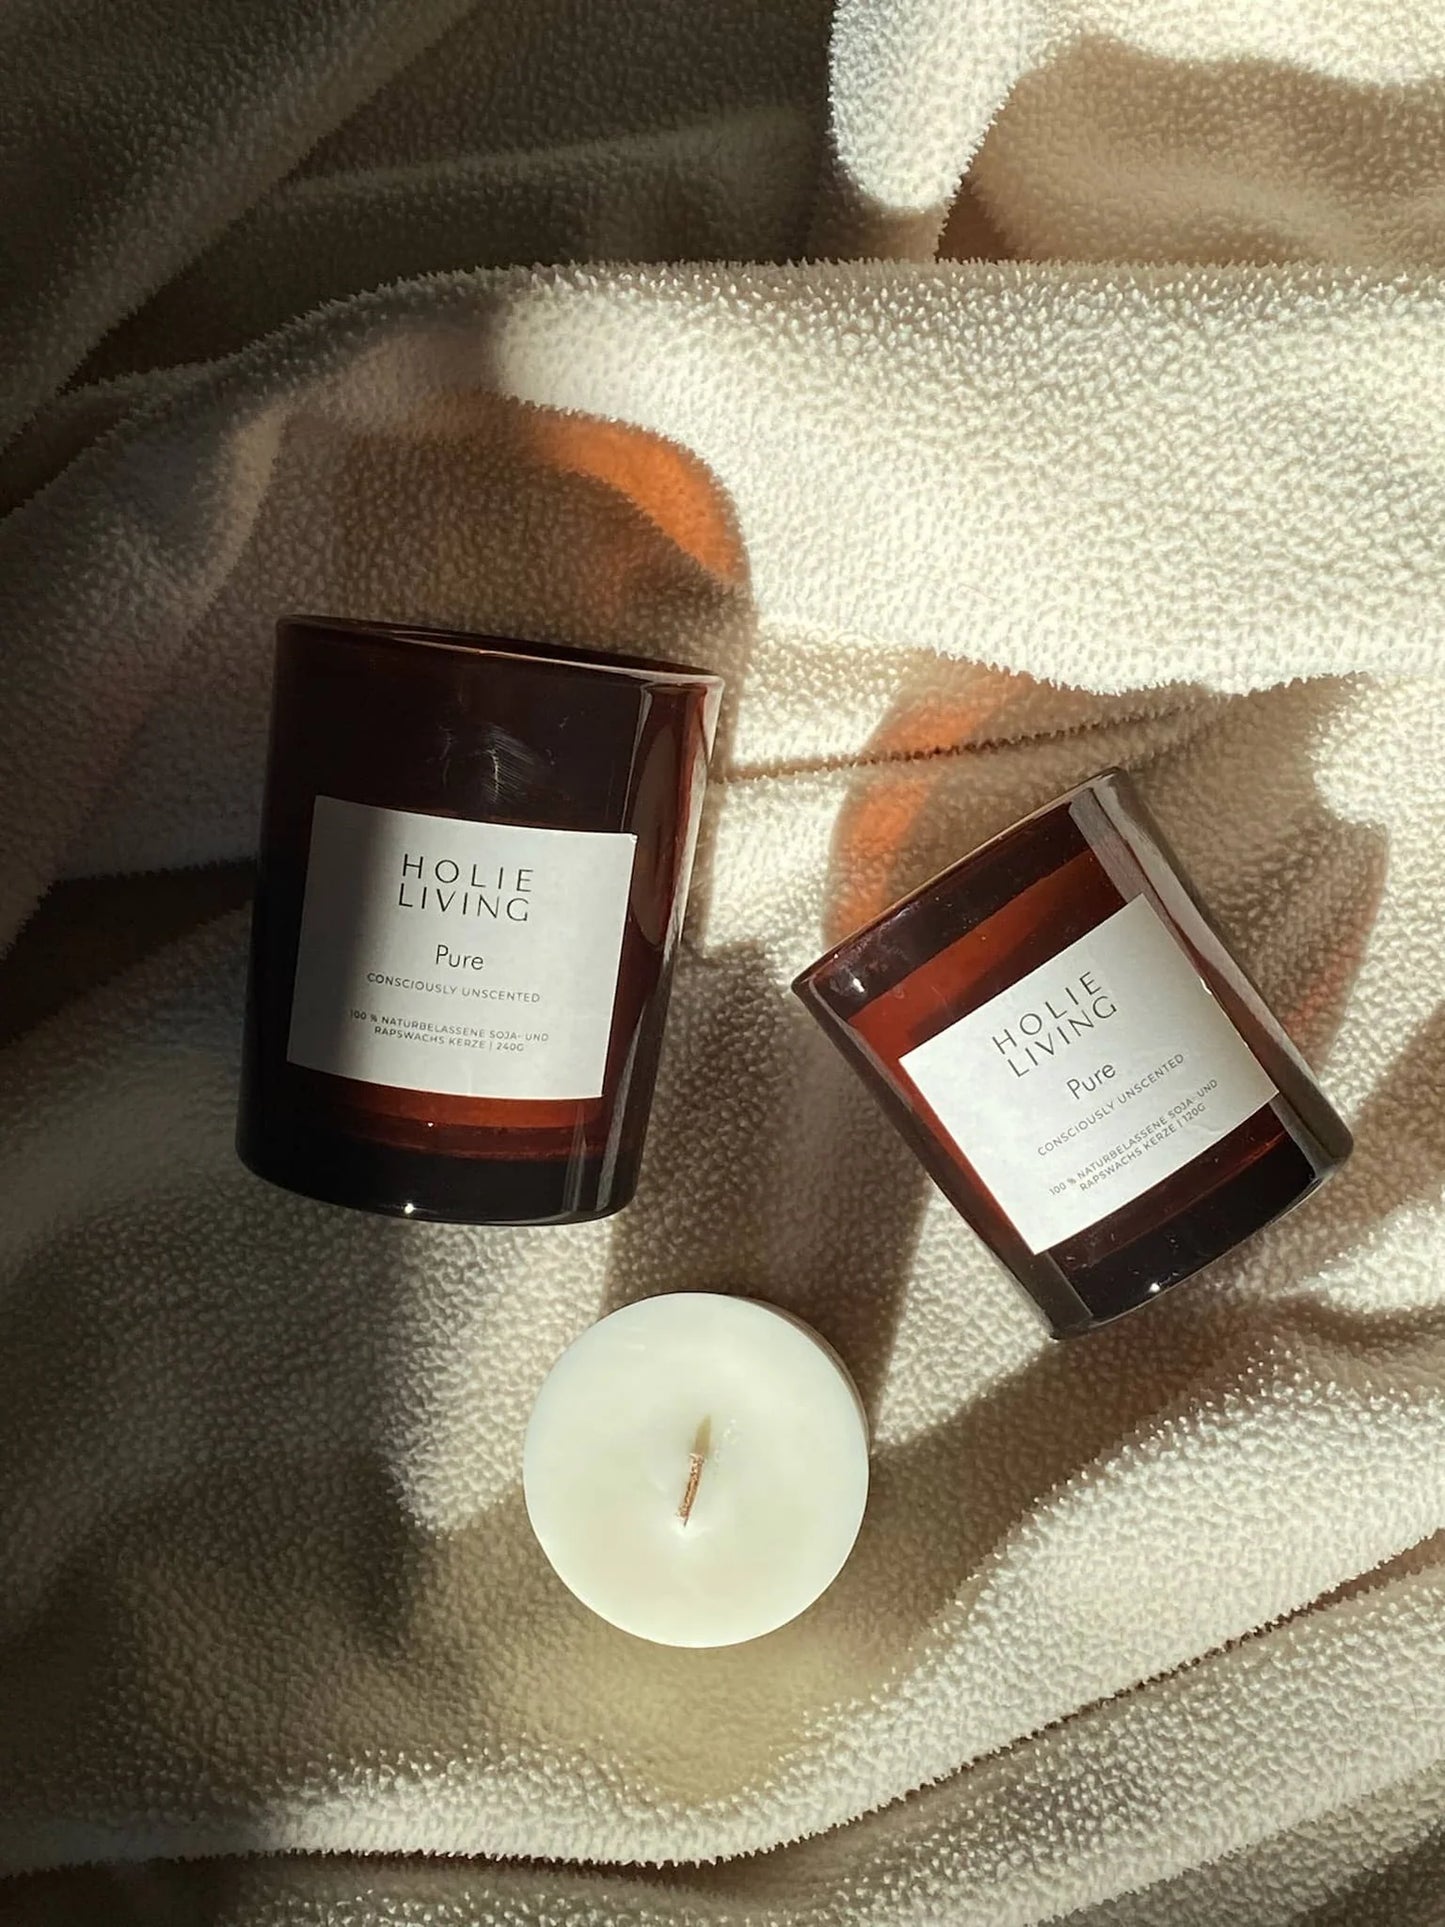 Pure | Non-toxic candle